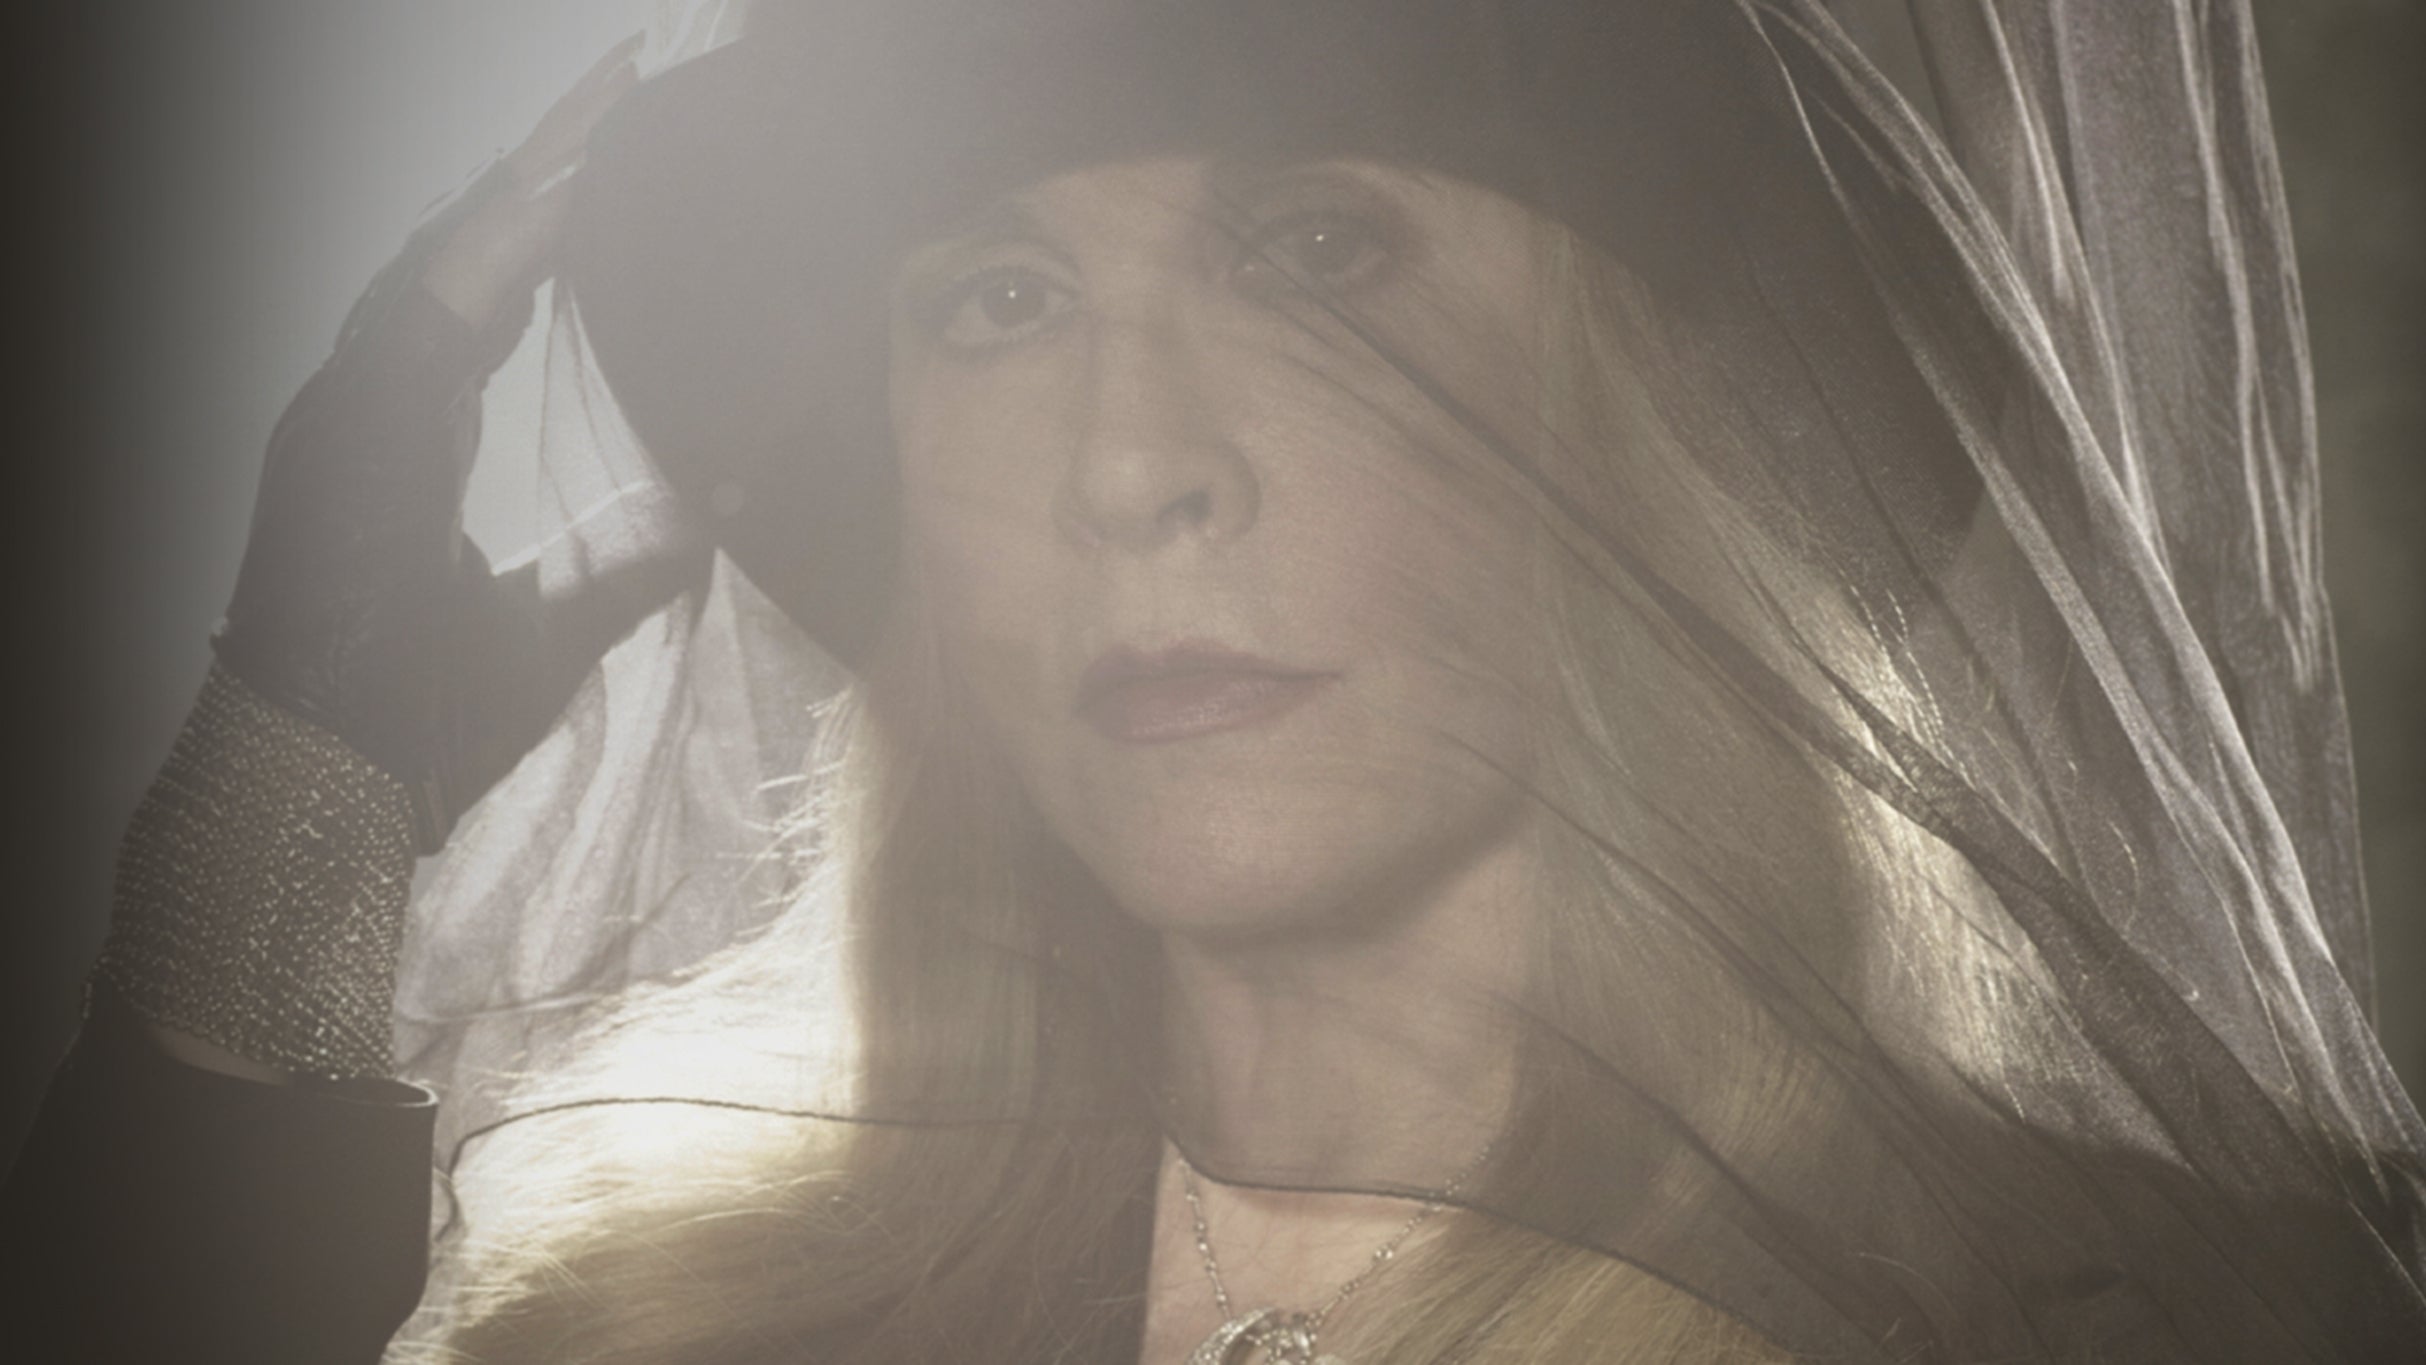 Stevie Nicks free presale code for early tickets in Greenville